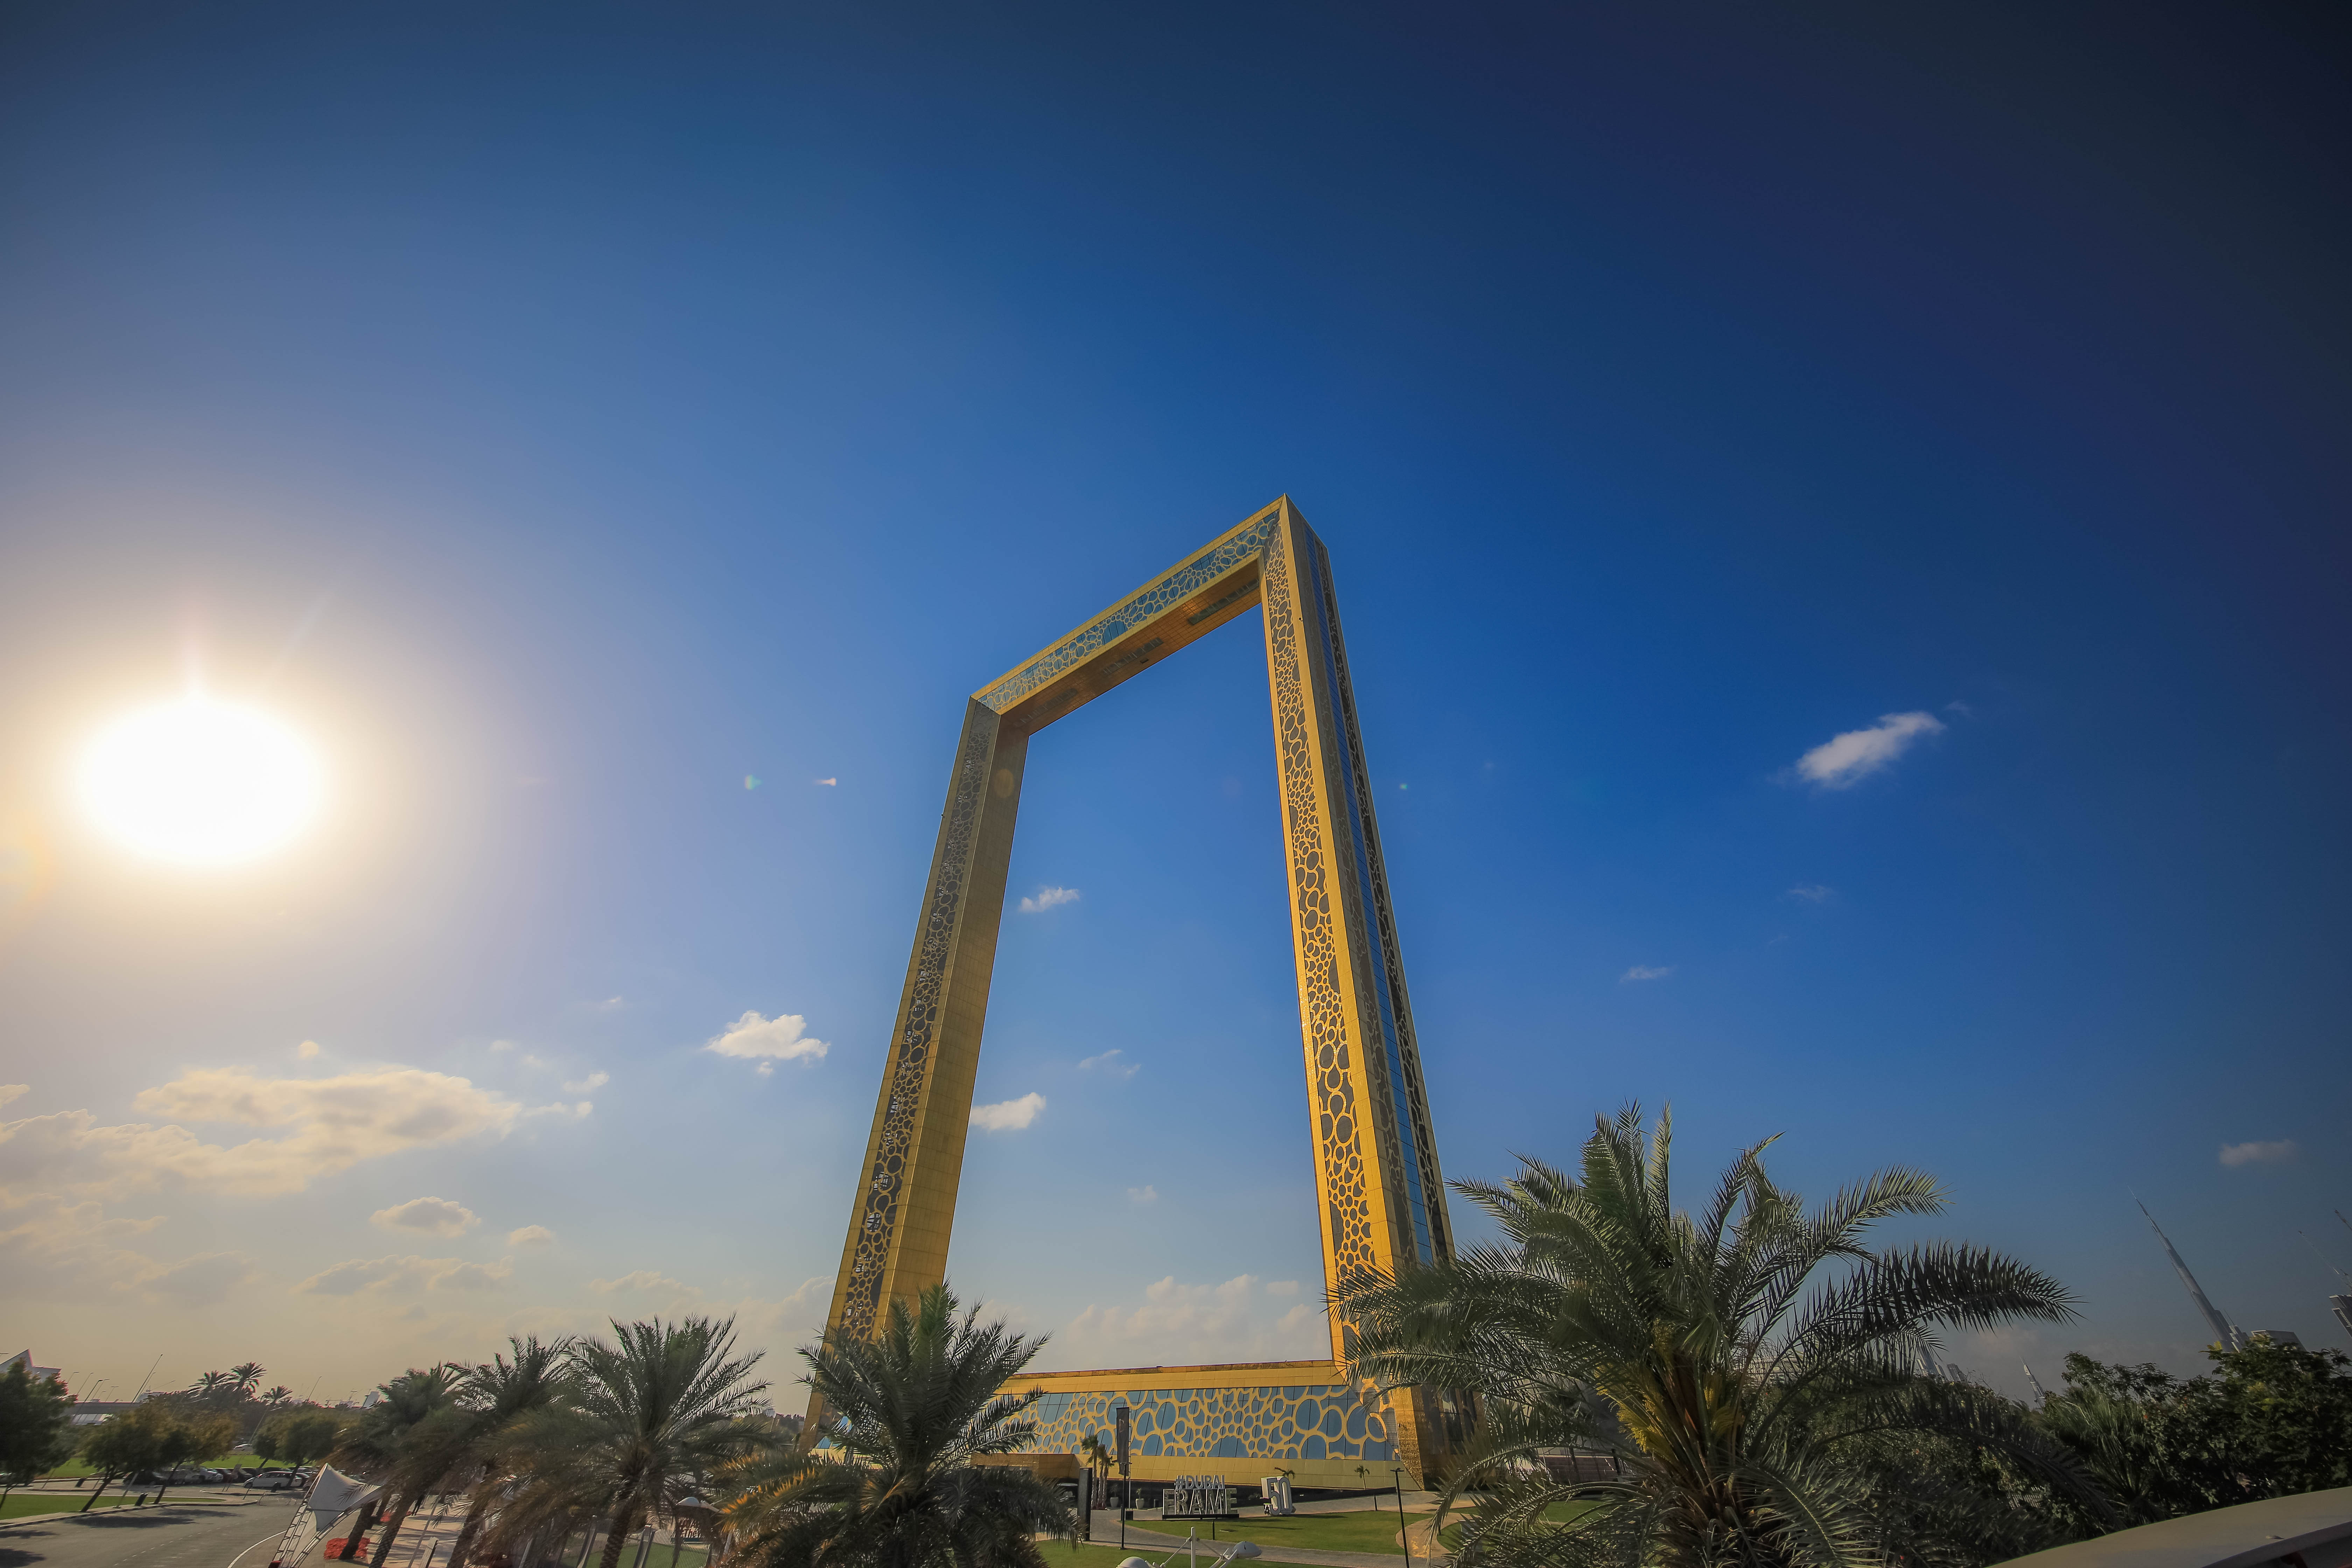 Dubai Frame over the two sides of the emirate